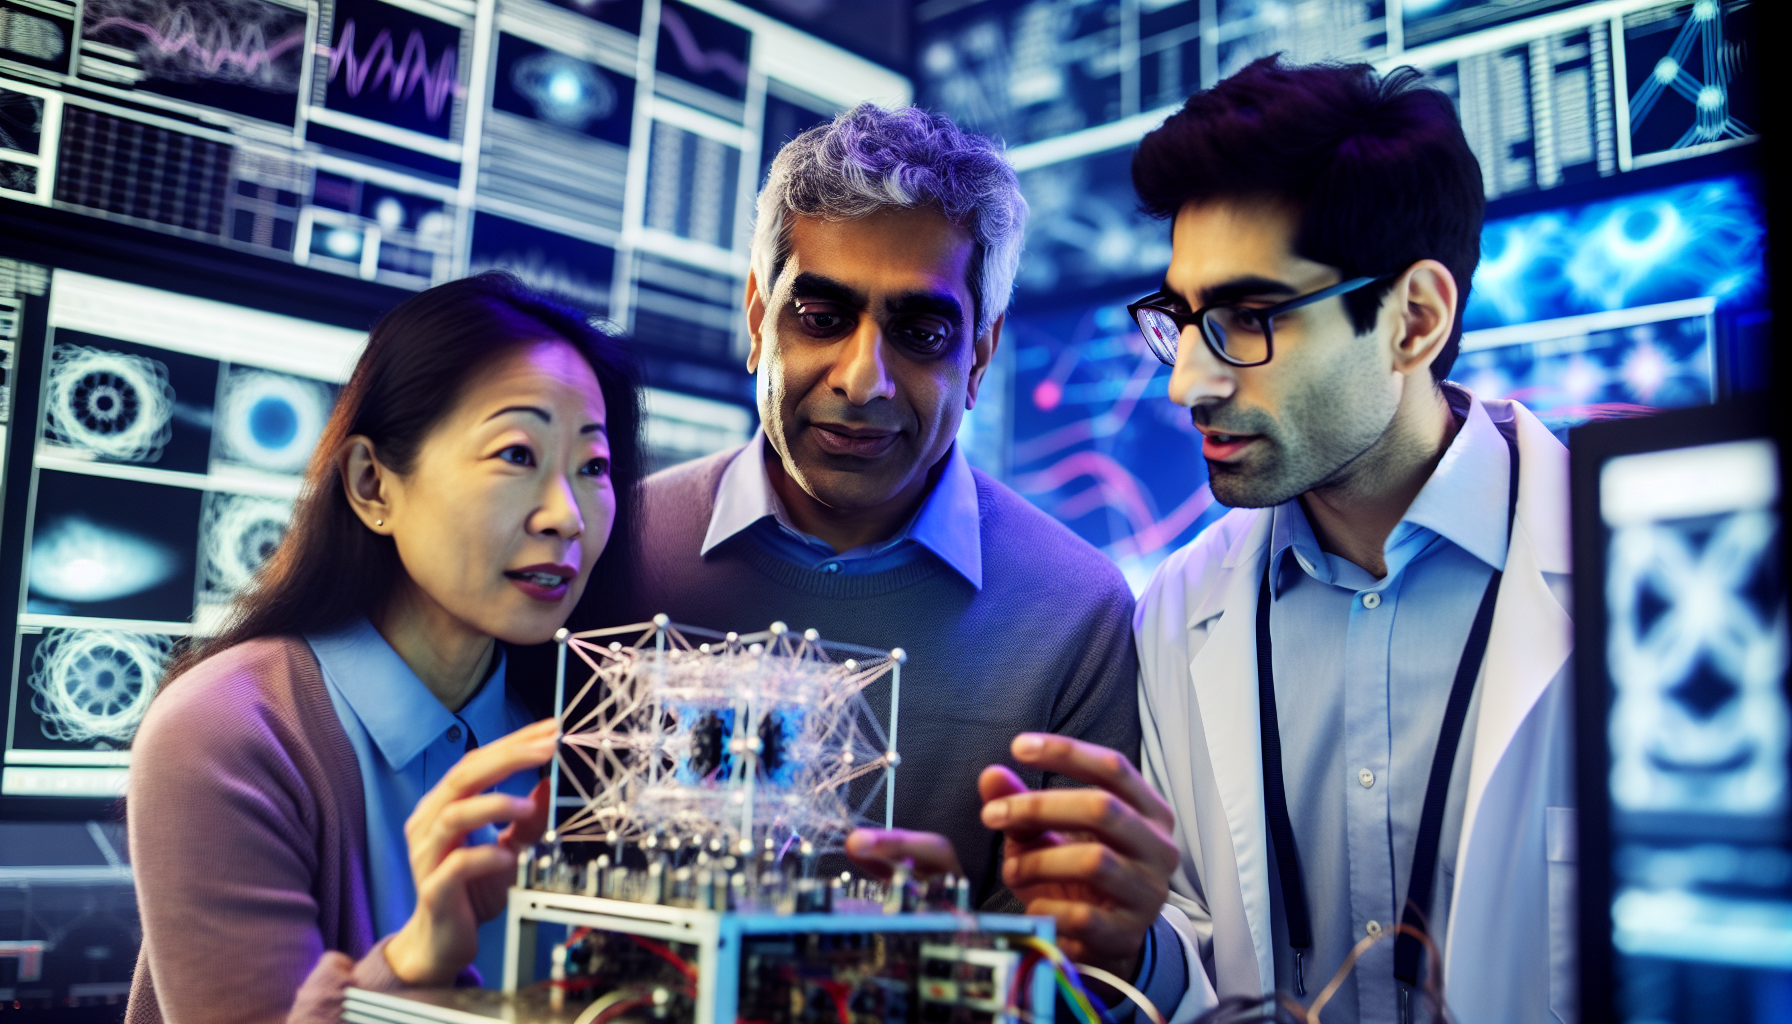 Scientists in a Los Angeles lab discussing over a quantum computing module